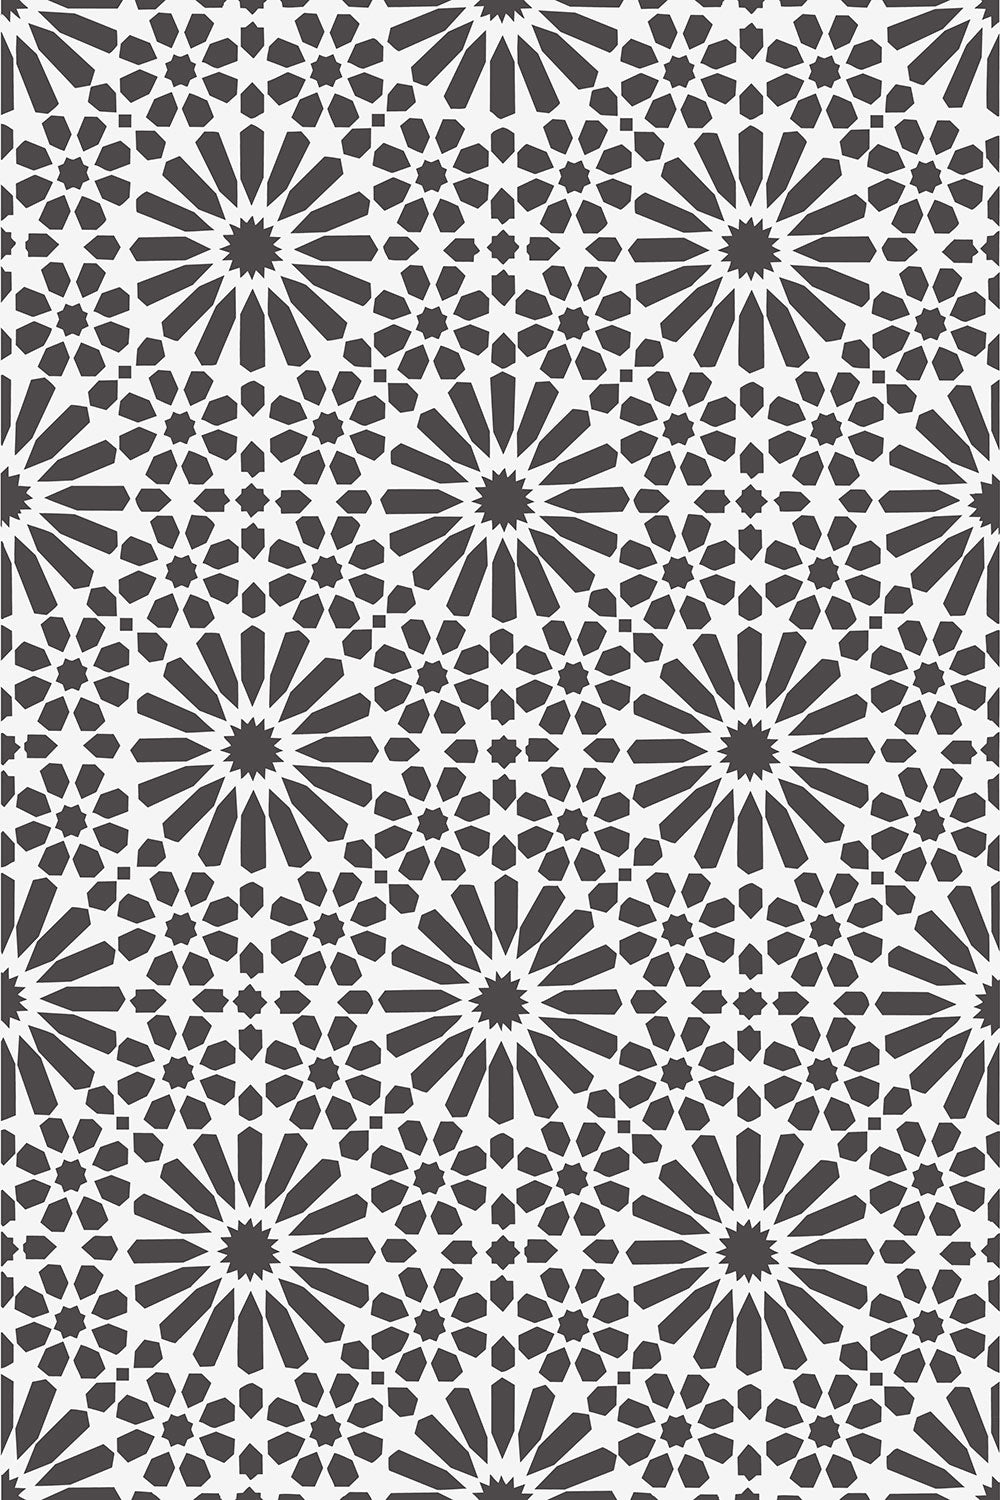 The School of Making Facets Stencil Abstract Floral Stencil Design for Hand-Painted DIY Clothing Projects